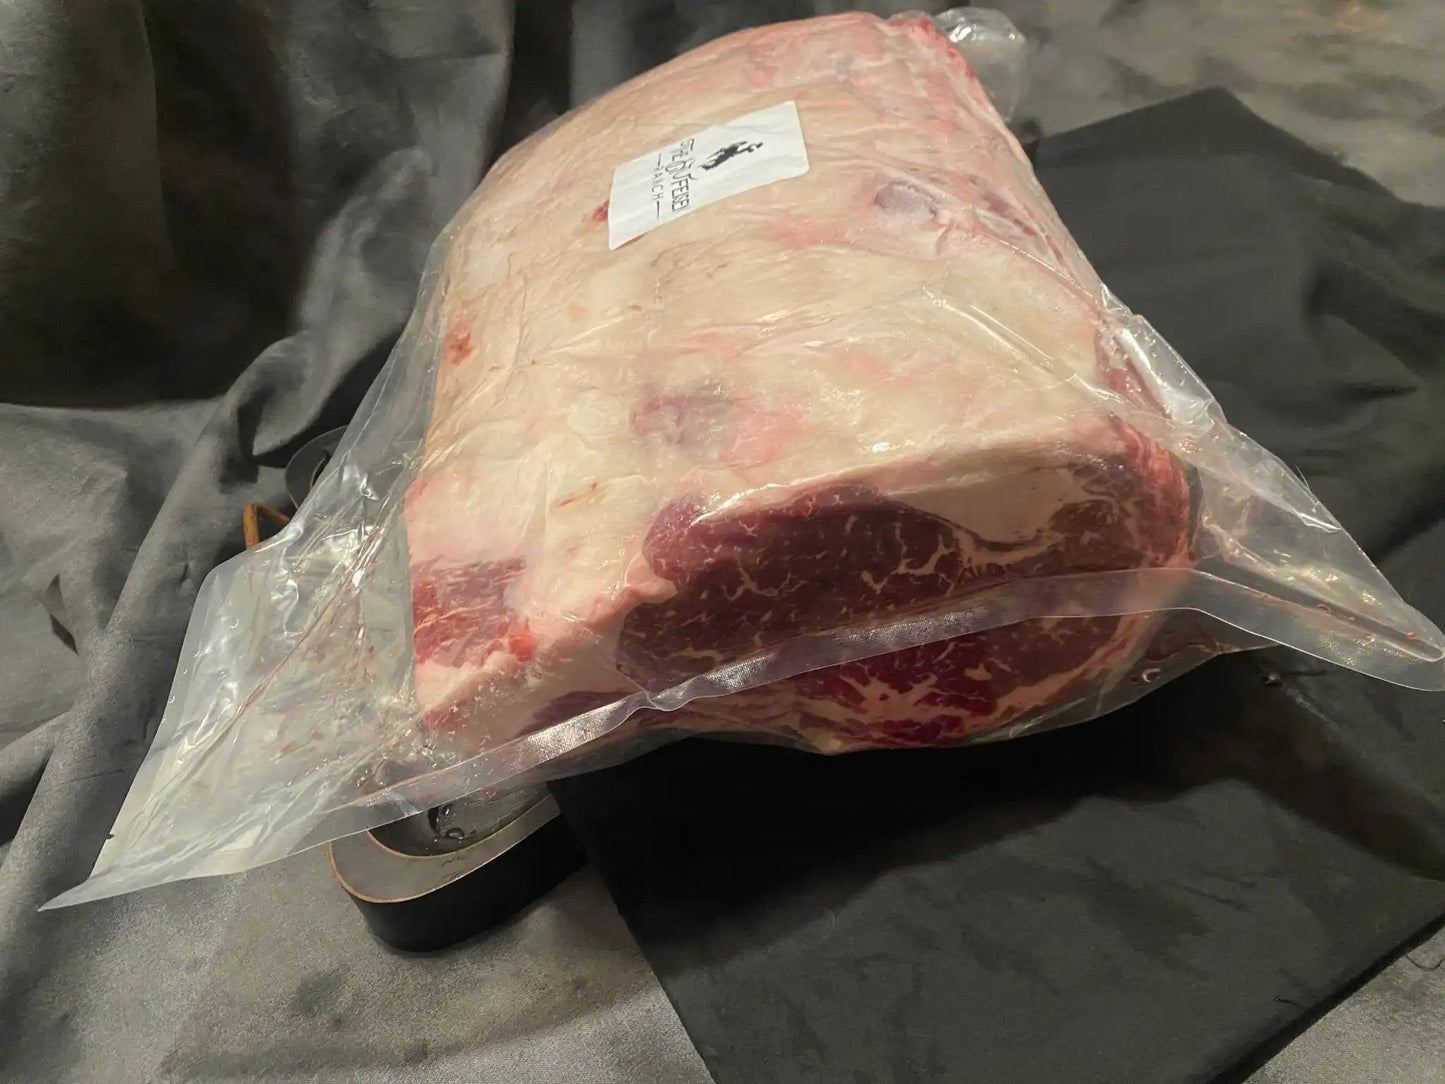 100% All-Natural Grass-Fed Pasture-Raised Wagyu Bone-in Prime Rib Roas





Introducing the 100% All-Natural Grass-Fed Pasture-Raised Wagyu Bone-in Prime Rib Roast from Hufeisen Ranch, the pinnacle of Wagyu beef excellence. This premie100%The Hufeisen-Ranch (WYO Wagyu)